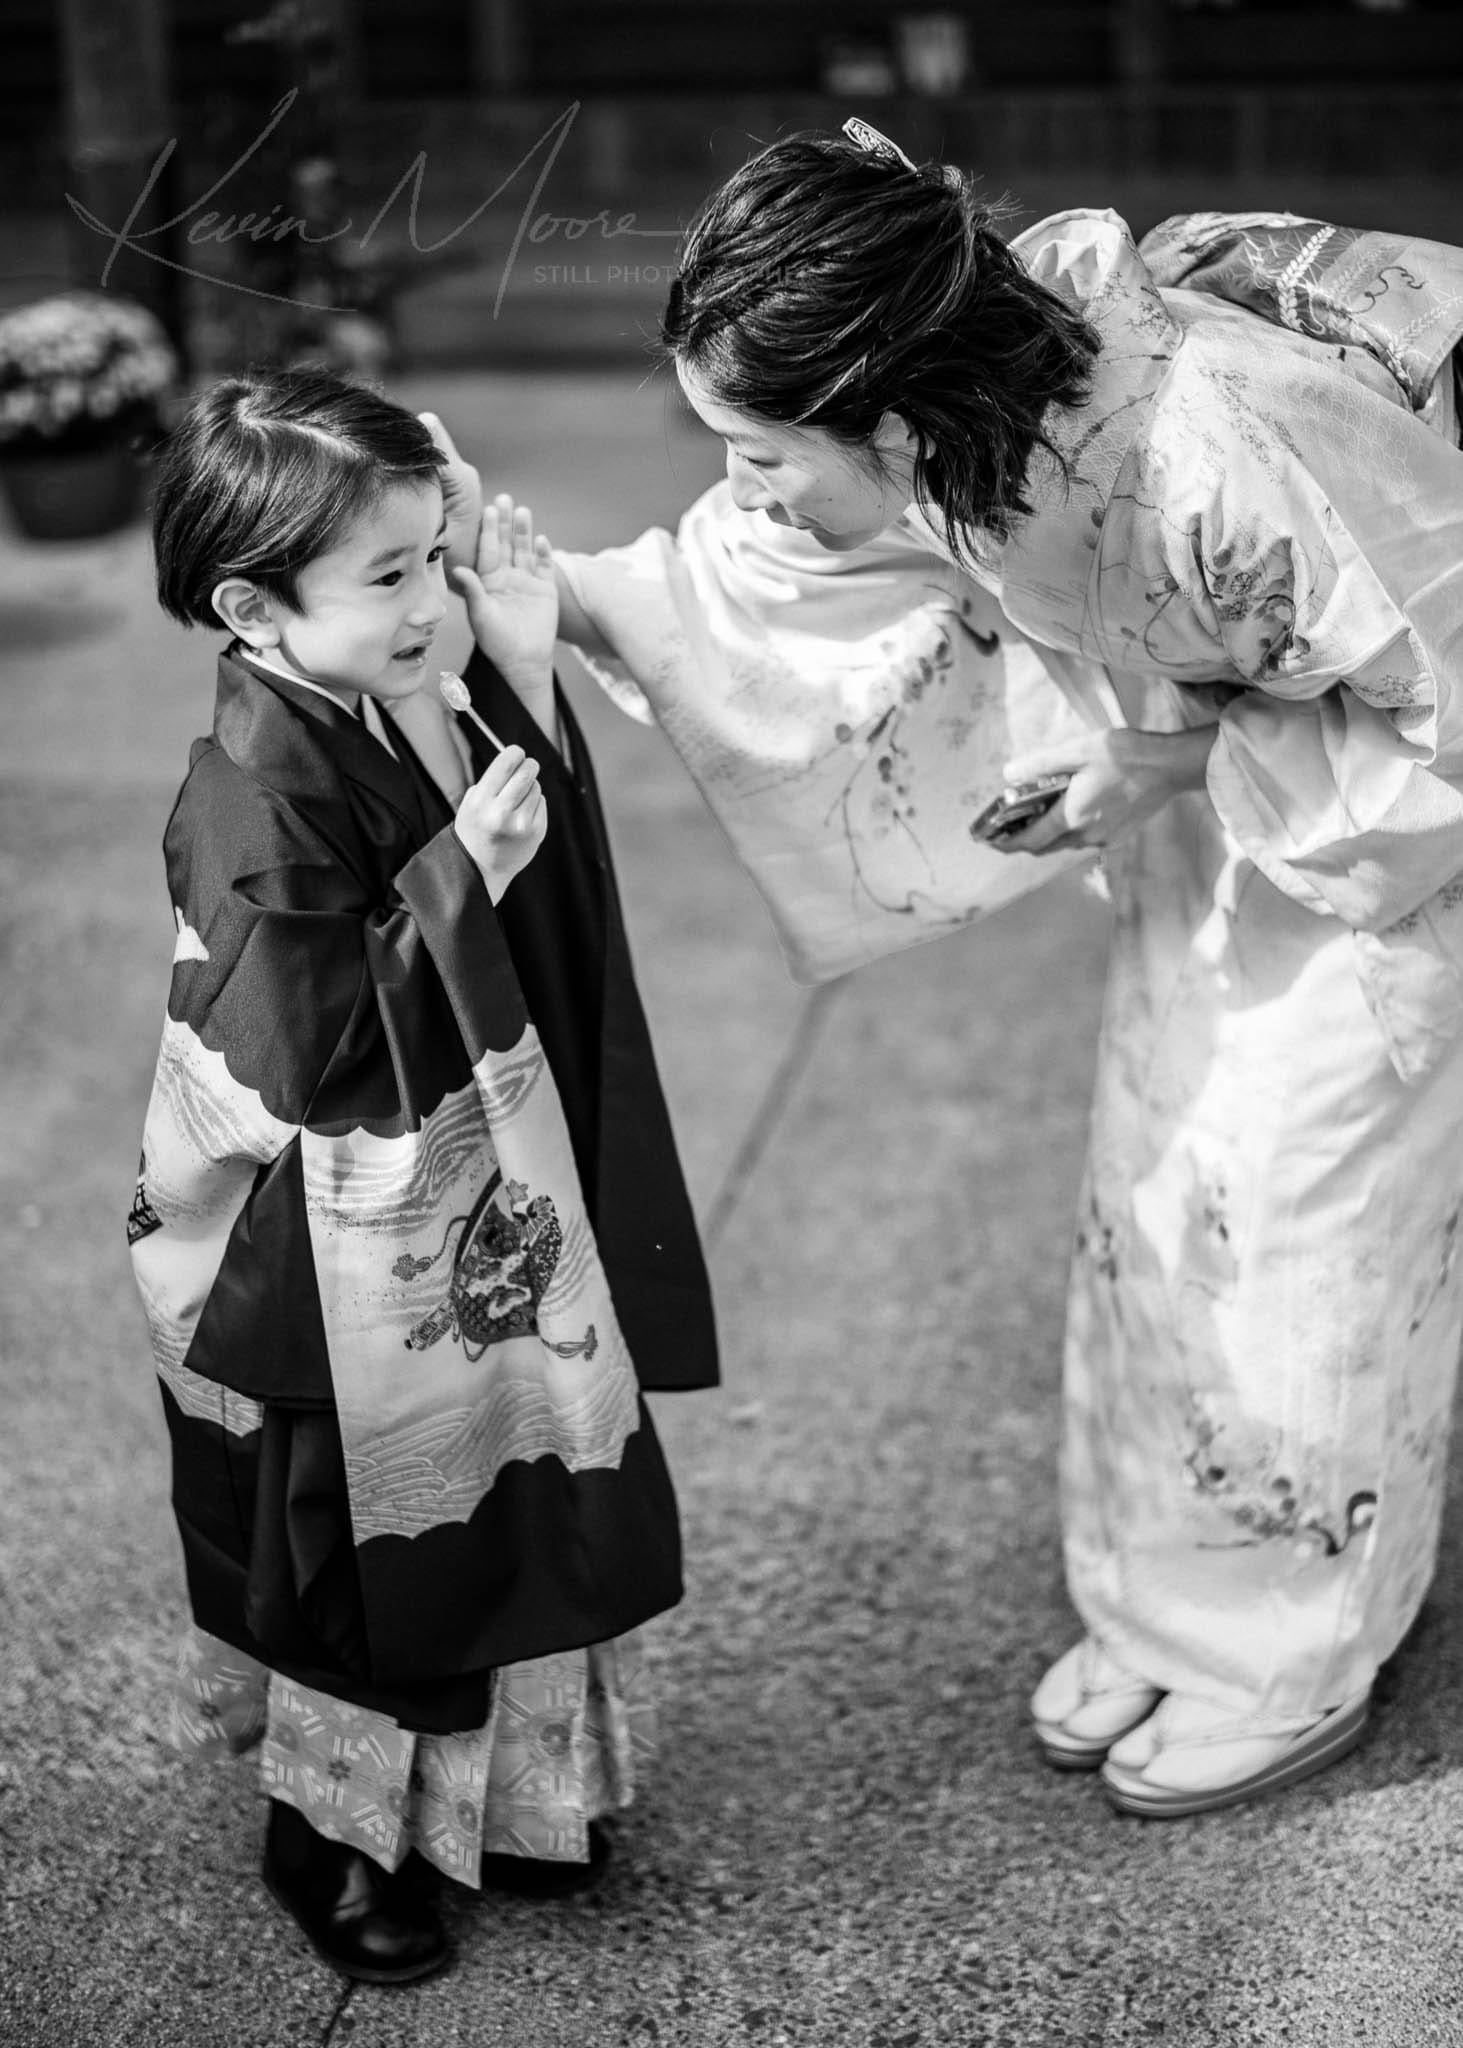 Traditional Japanese mother and child sharing intimate moment outdoors in black and white.